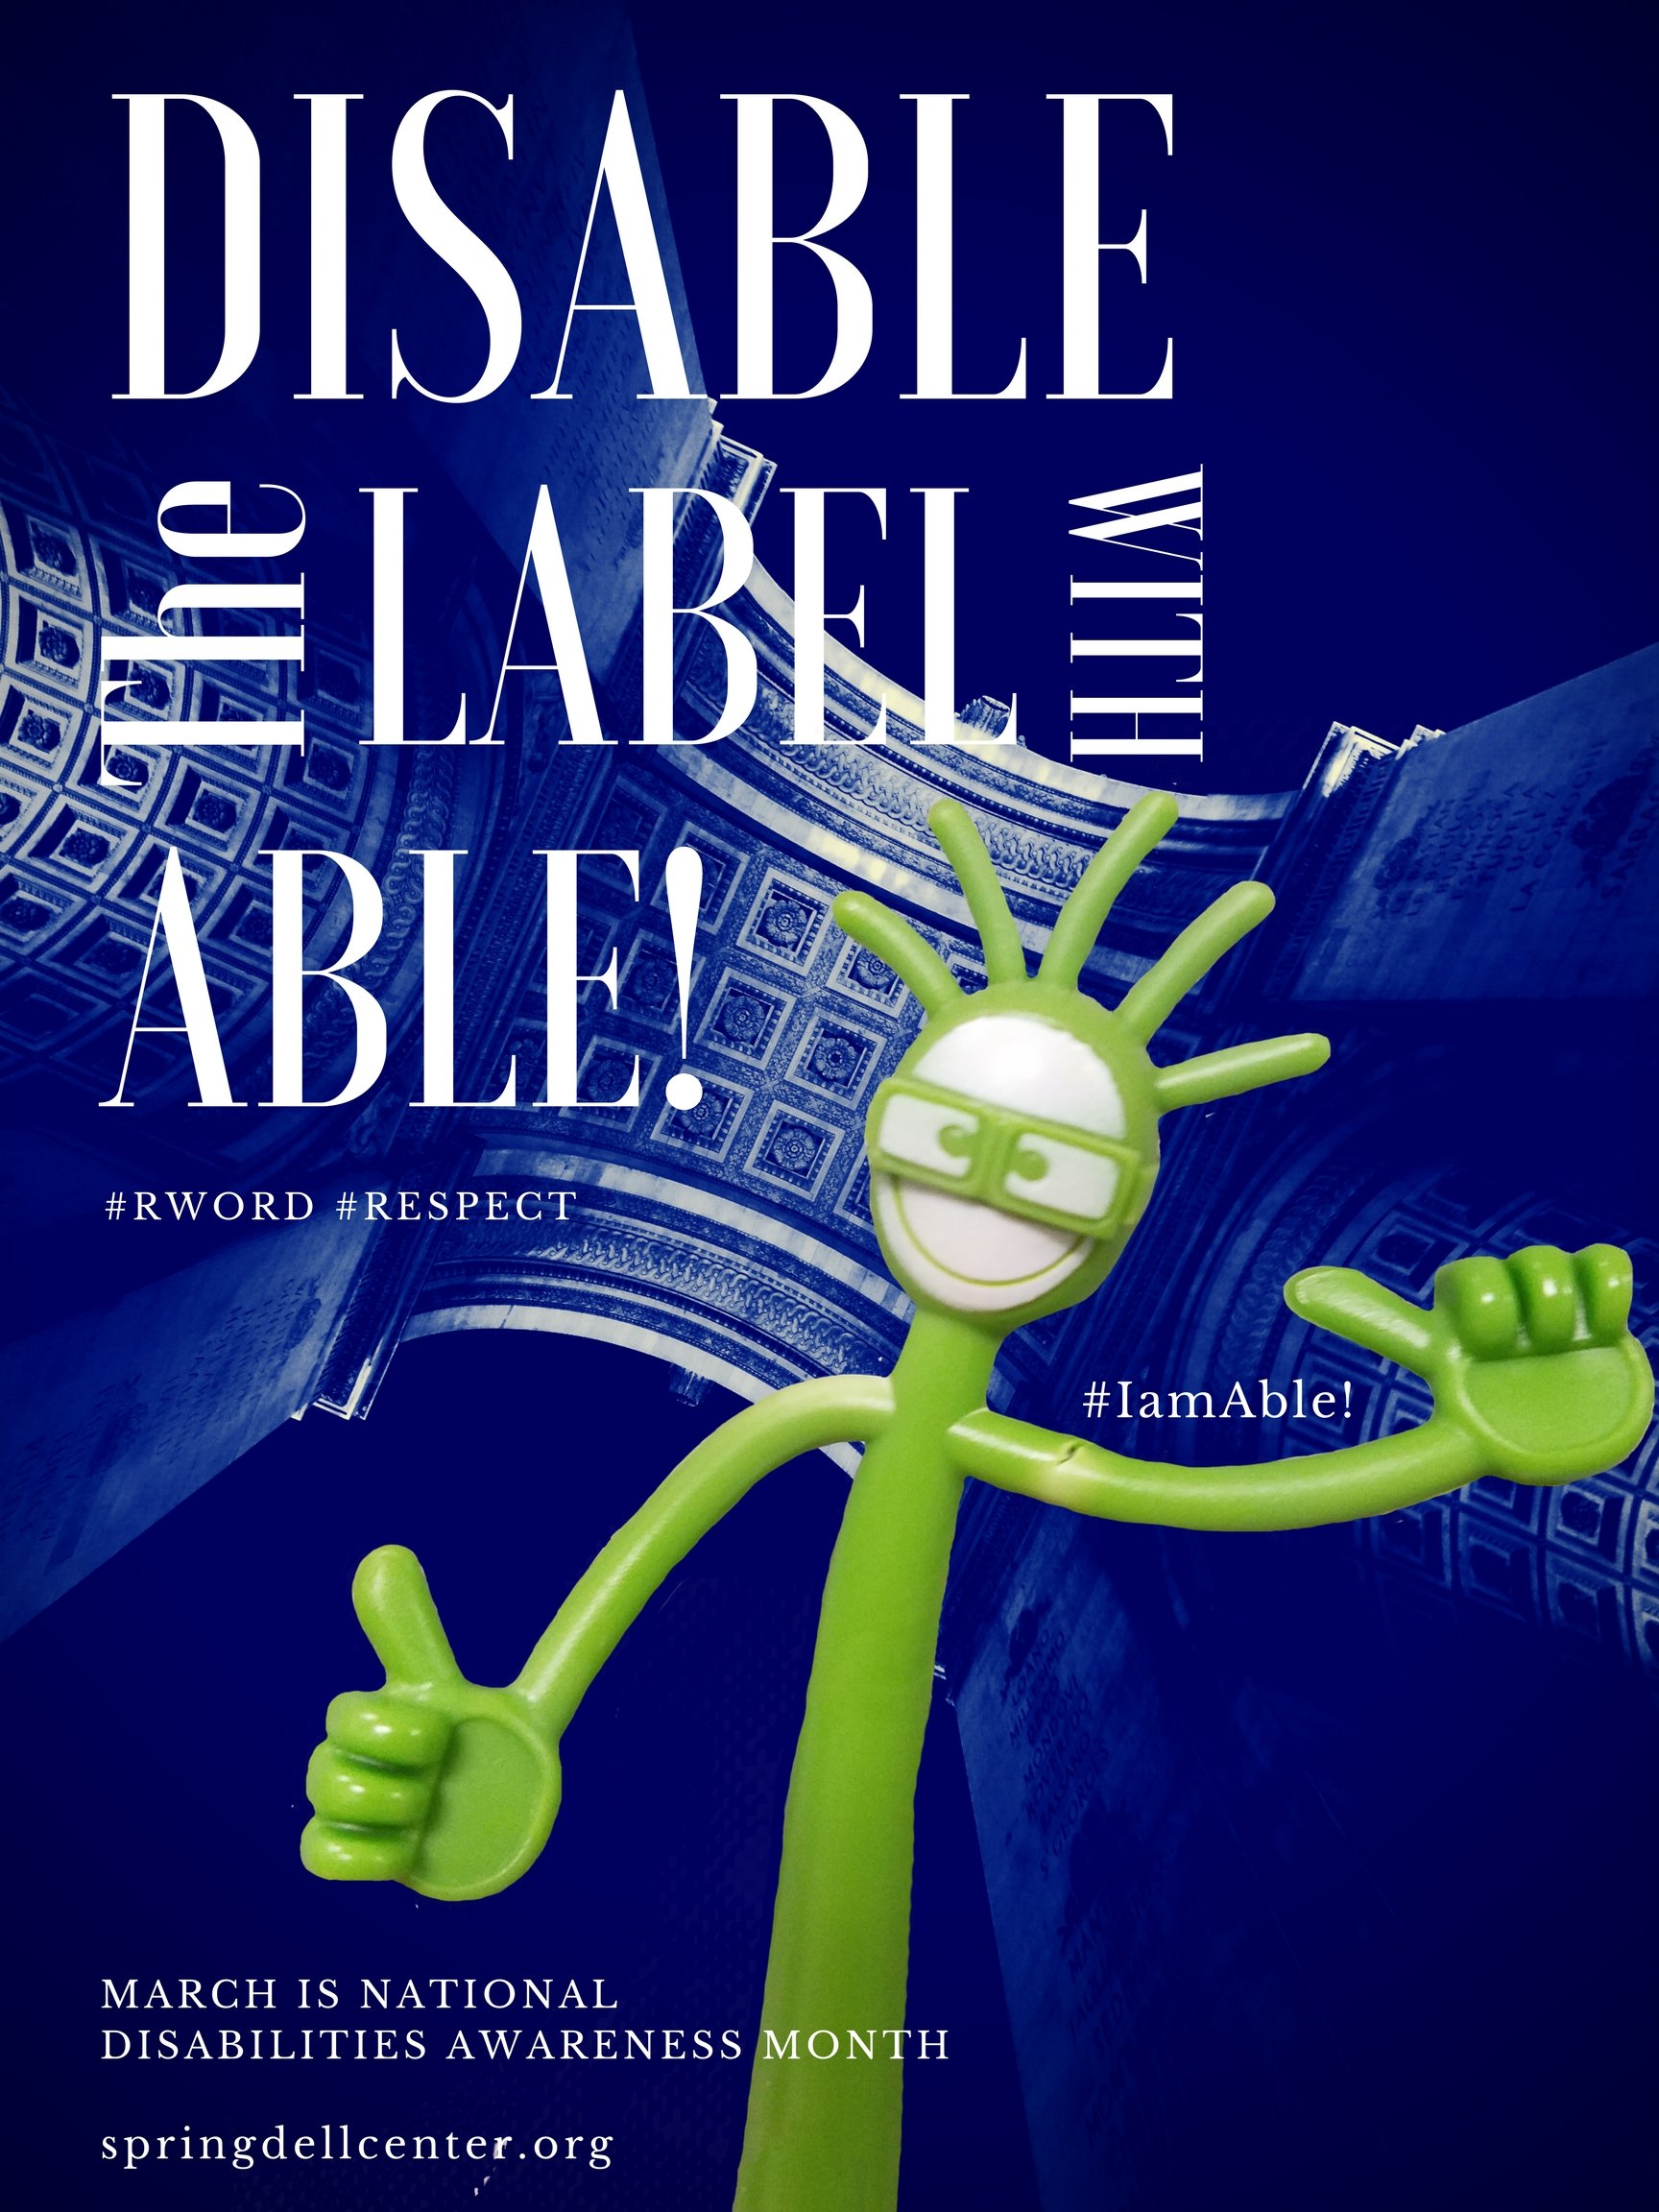 March is National Disabilities Awareness Month